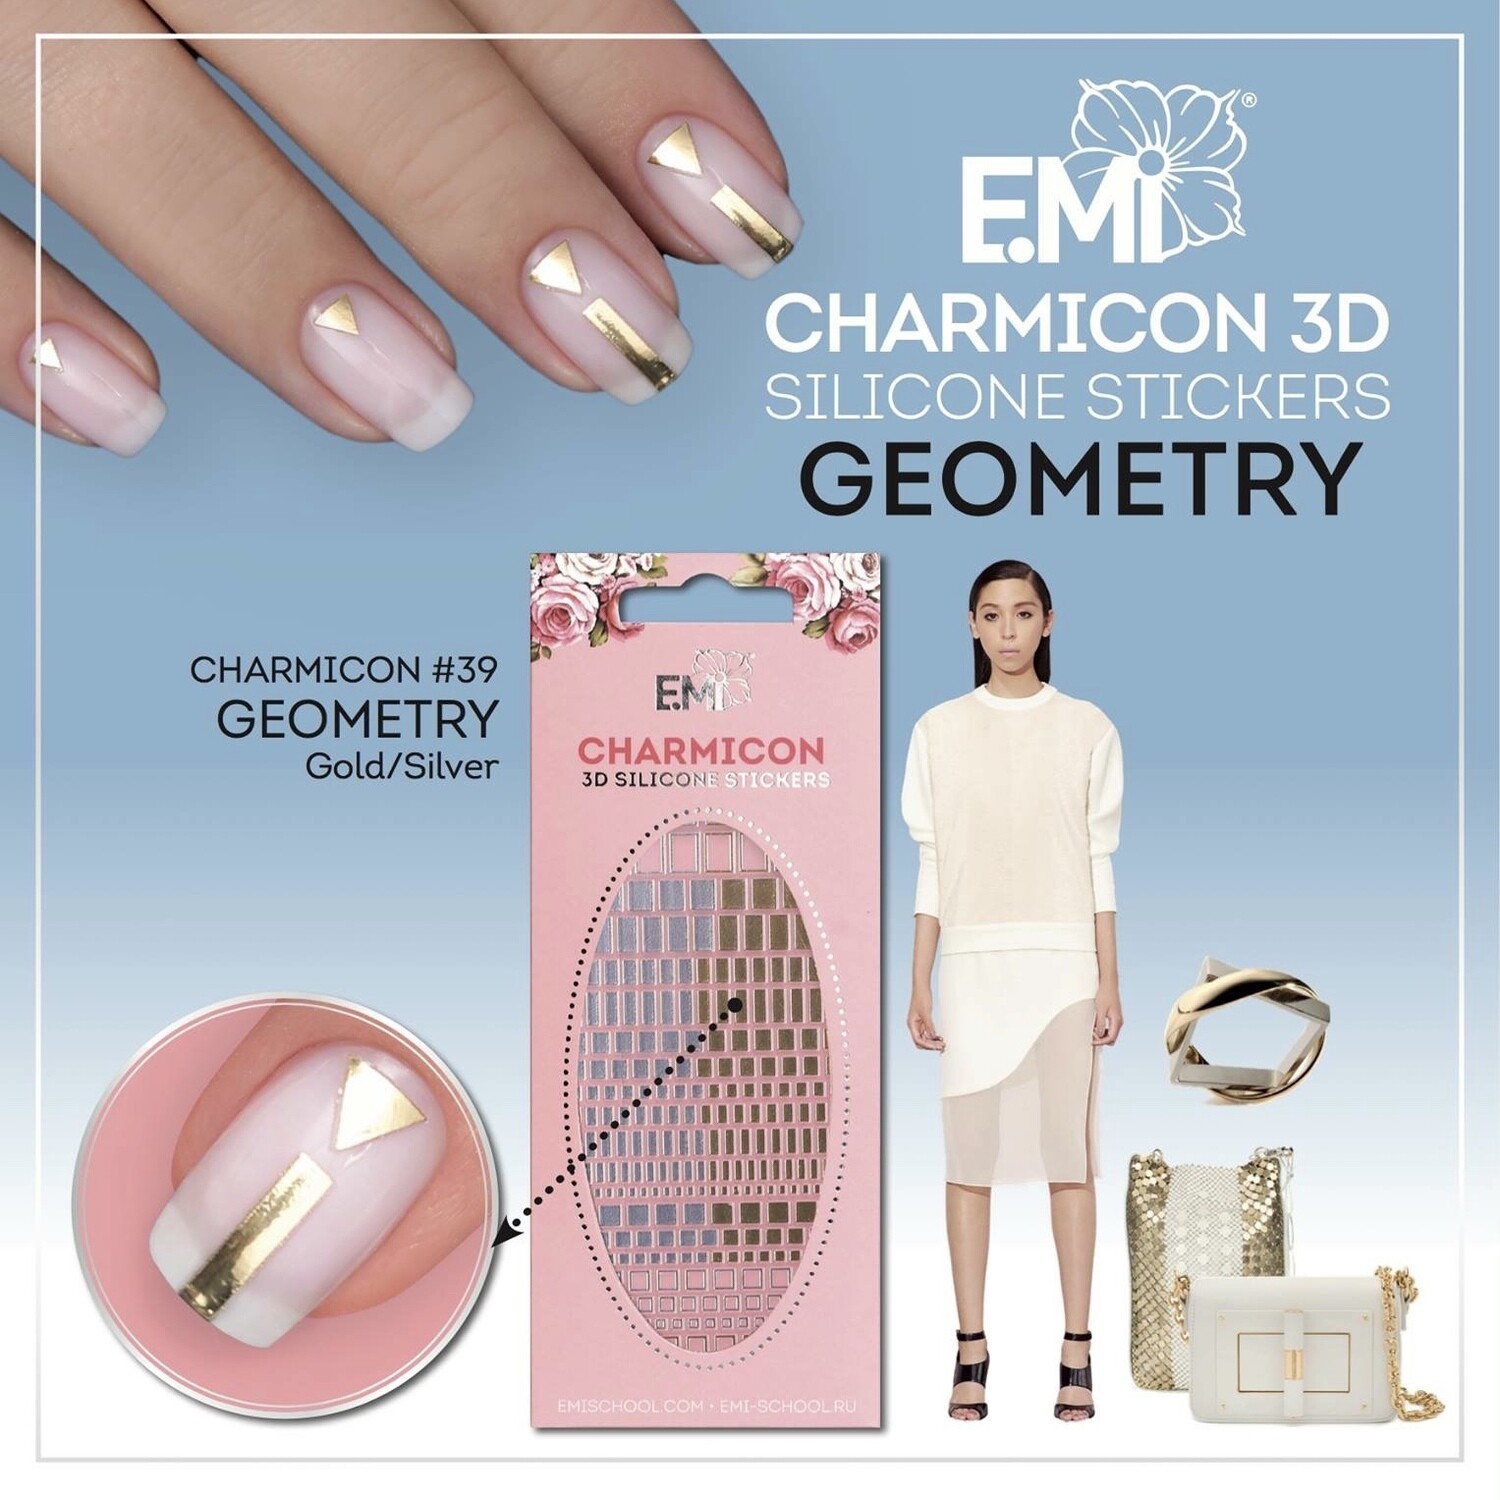 Charmicon Silicone Stickers #39 Geometry Gold/Silver